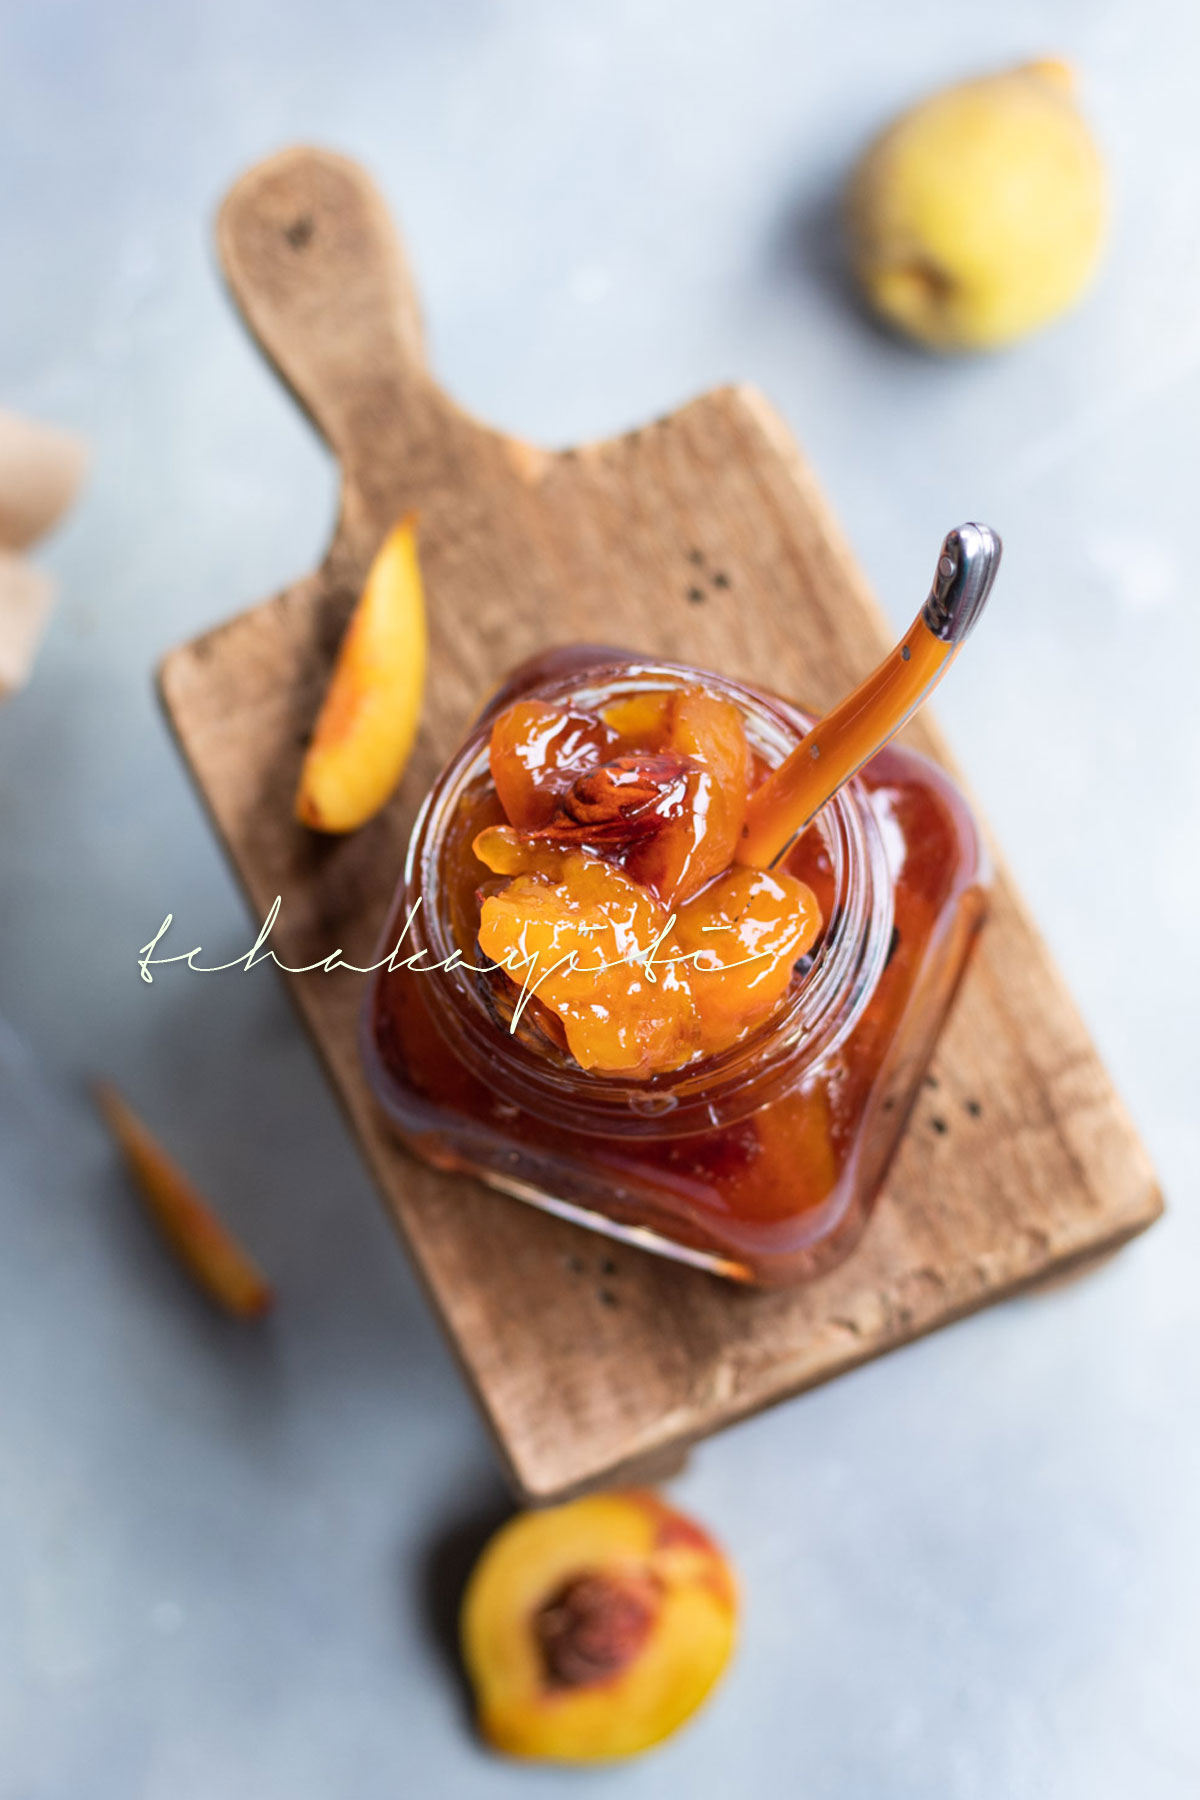 This sumptuous peach jam is prepared with Haitian grown peaches. A delightful recipe to add to your collection. | tchakayiti.com